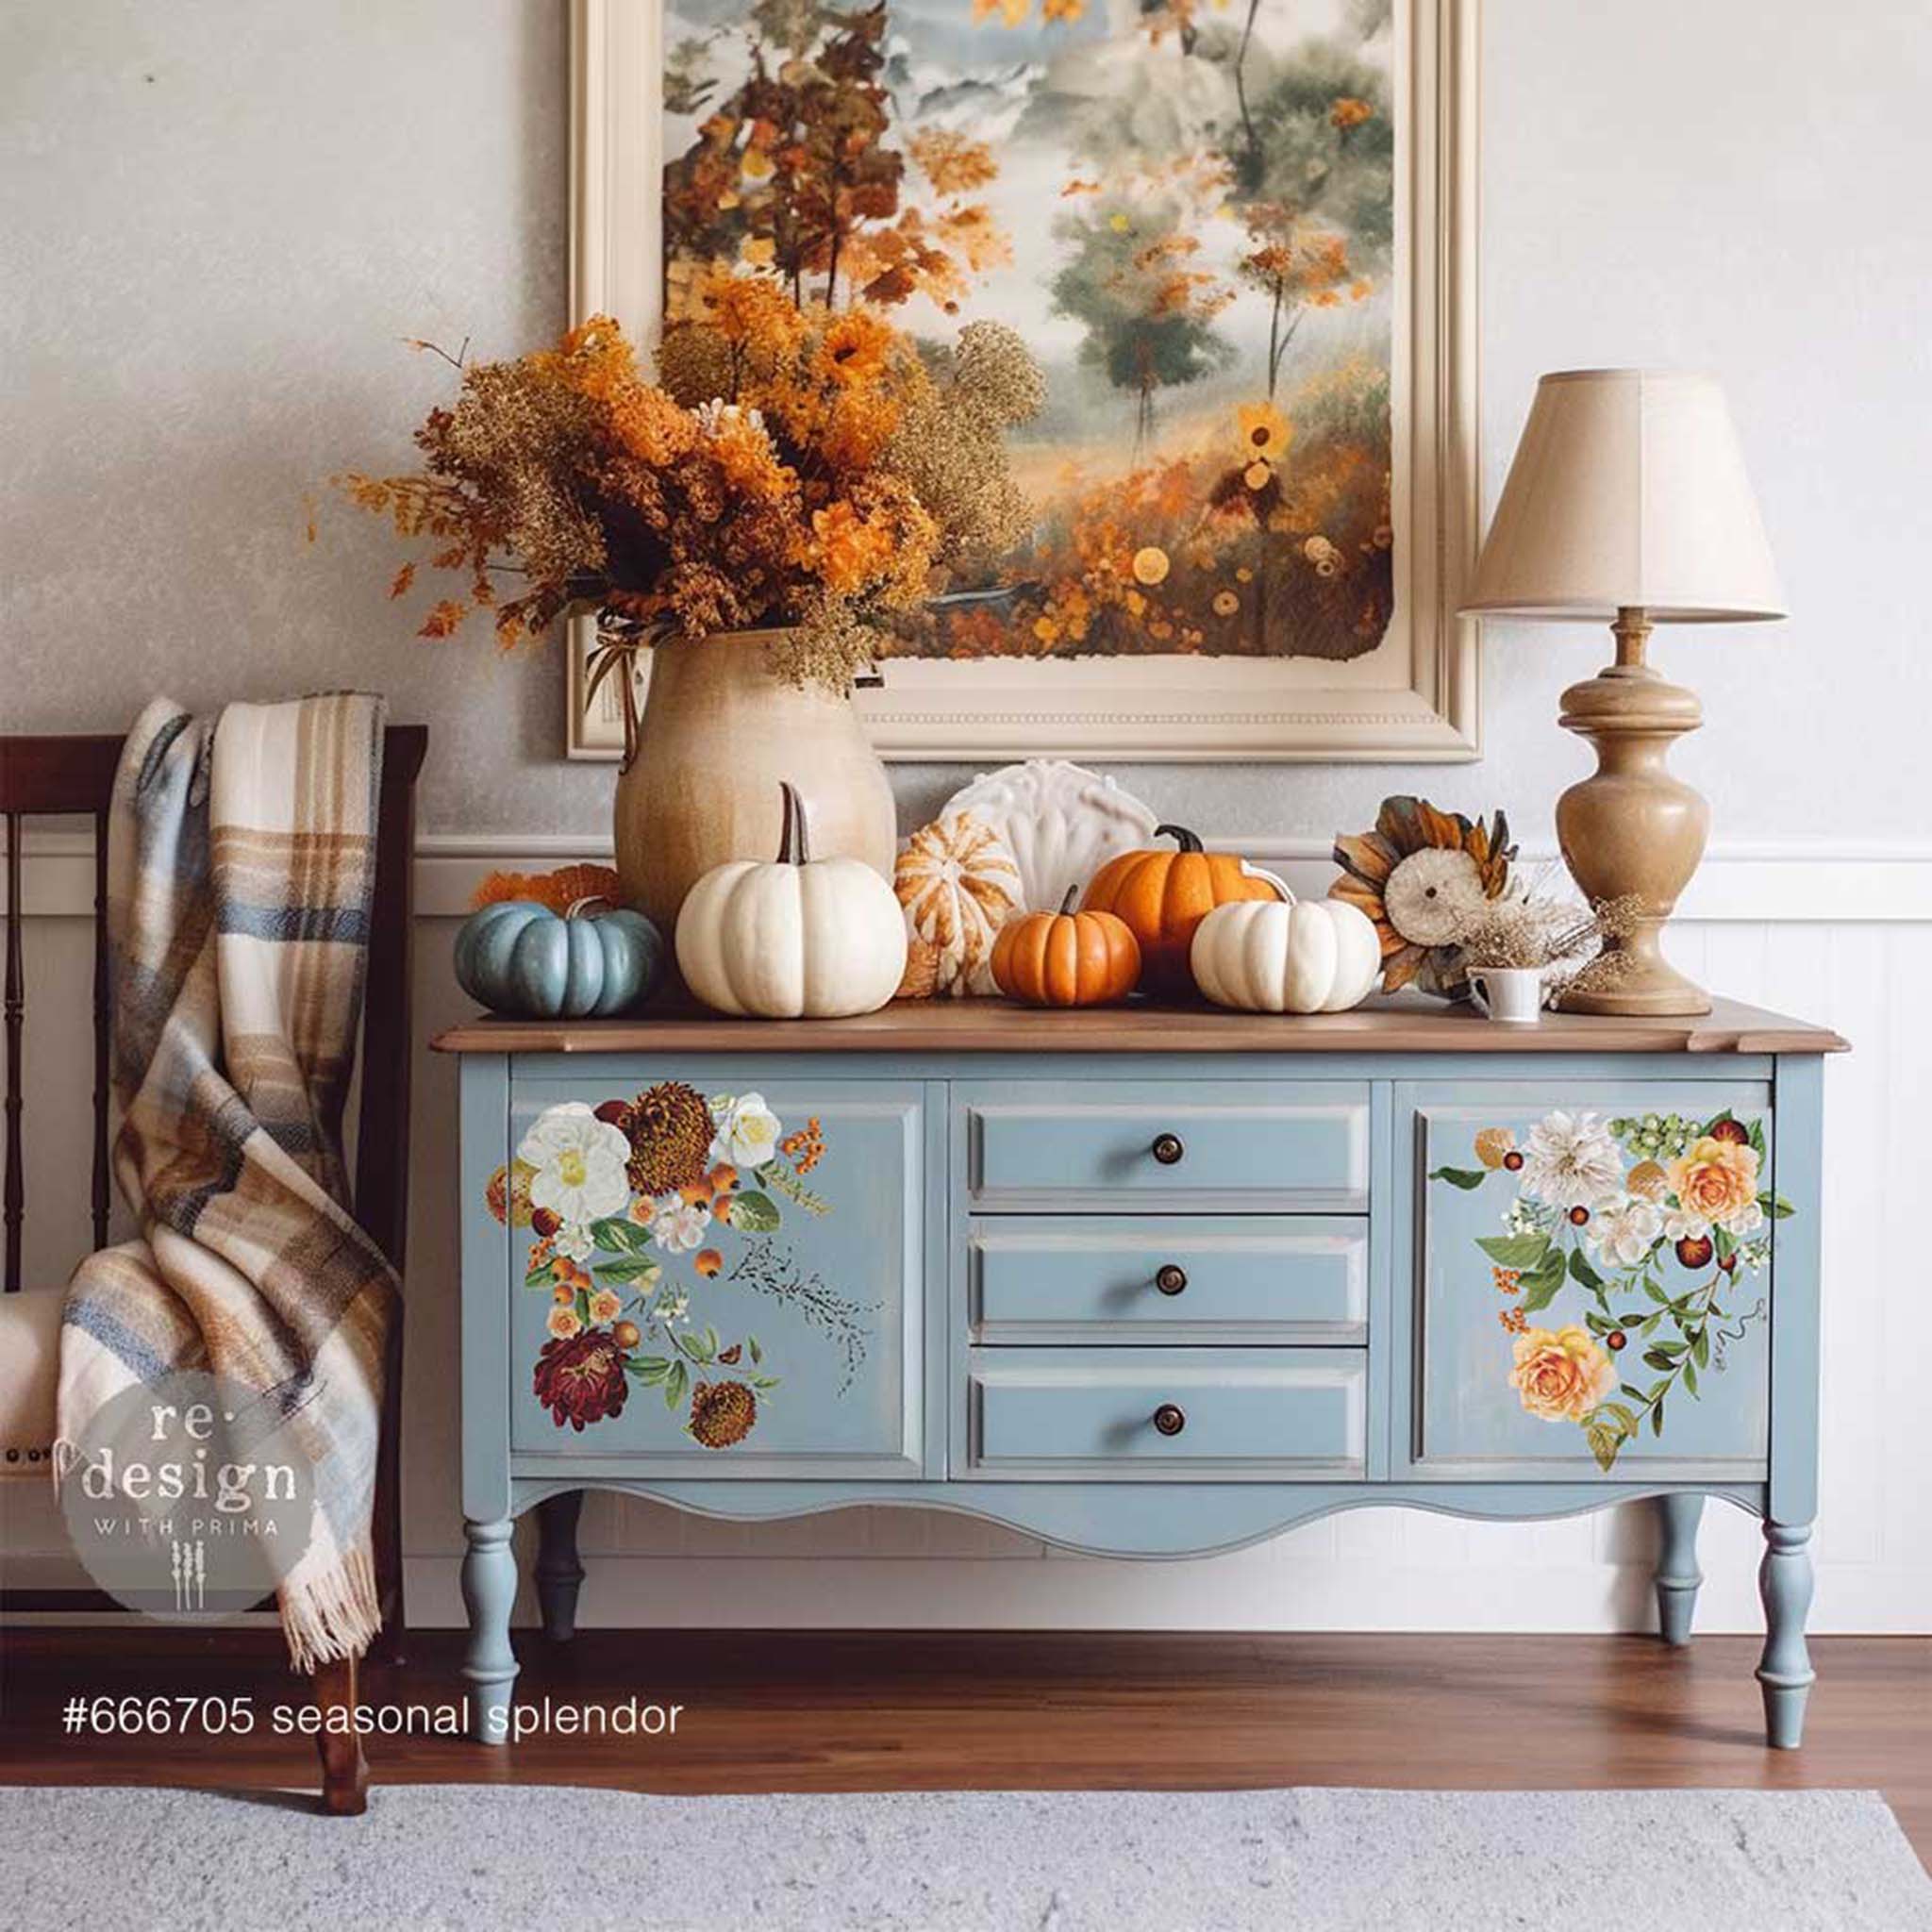 A vintage light blue console table with a natural wood top features ReDesign with Prima's Seasonal Splendor small transfer on its 2 doors.